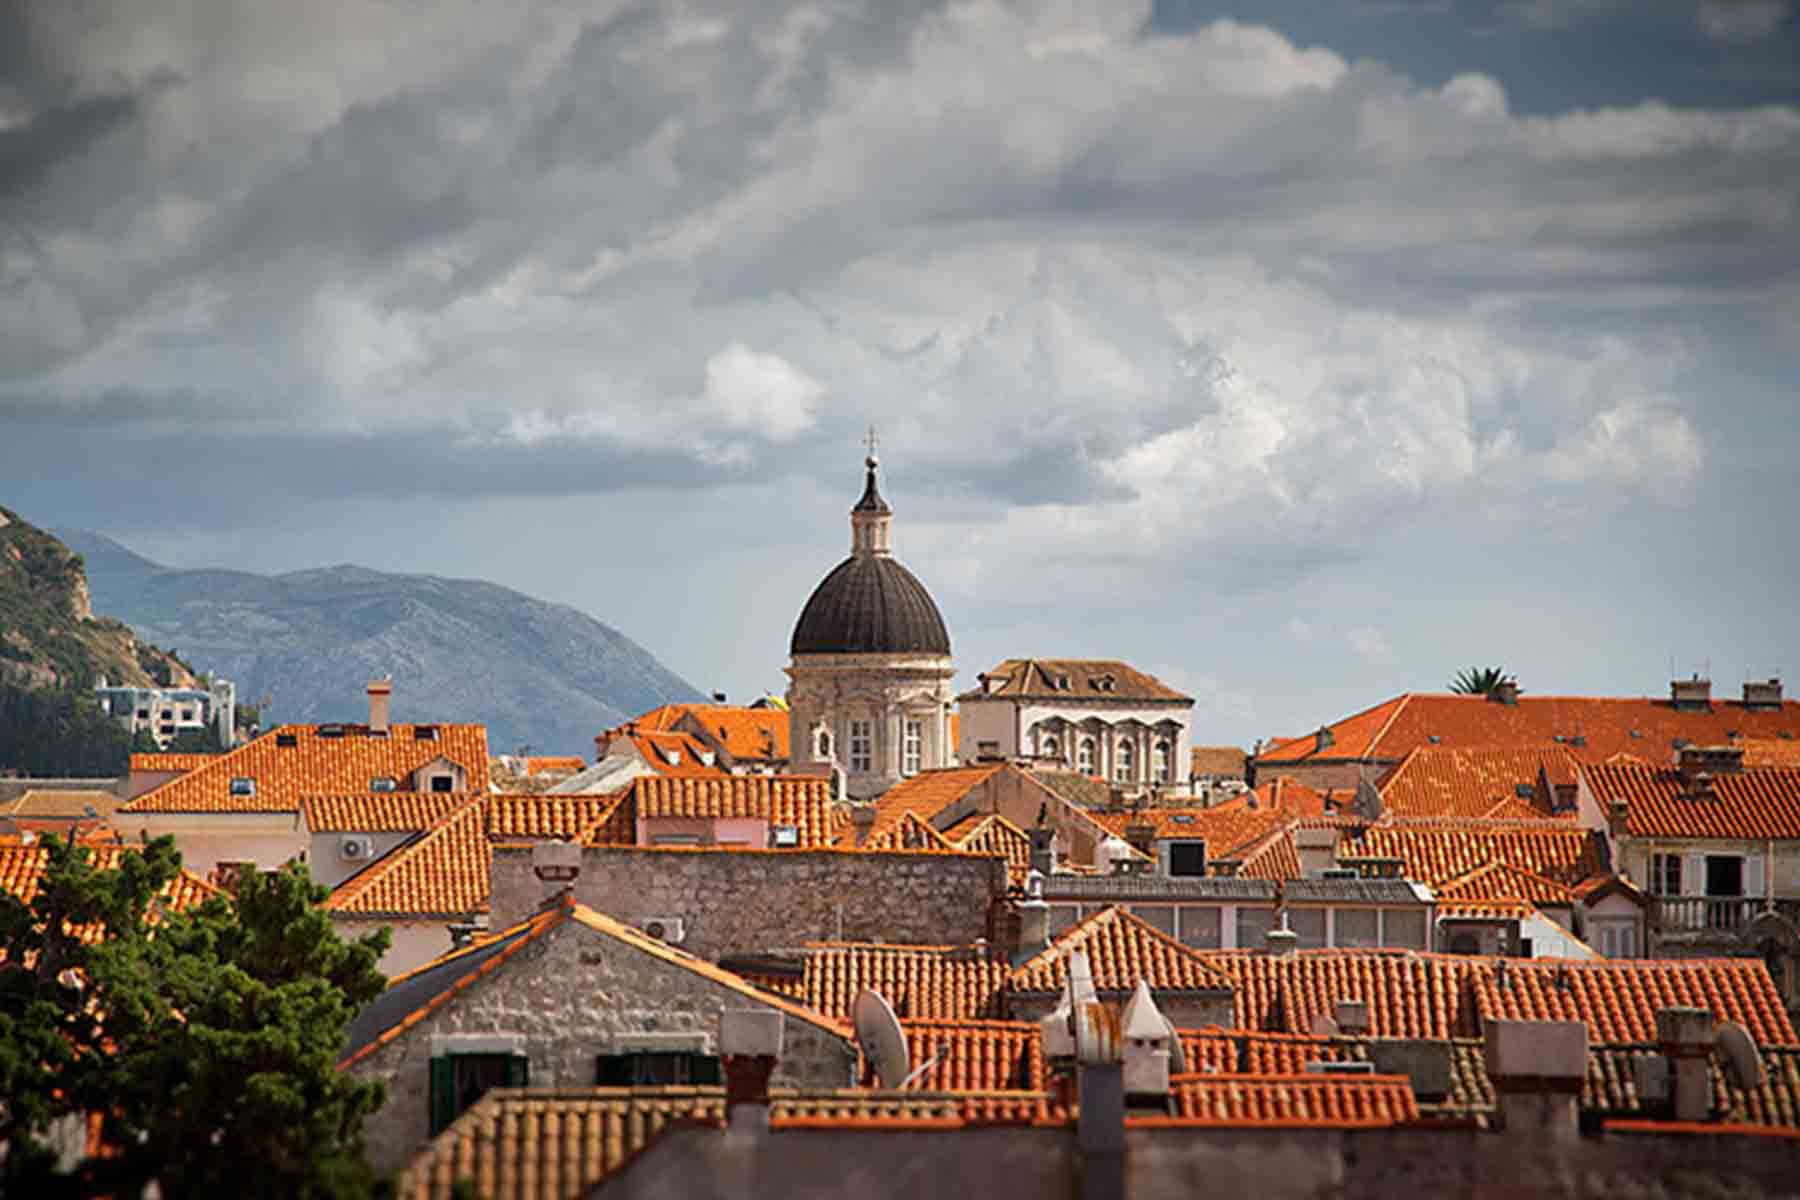 City rooftops in Italy